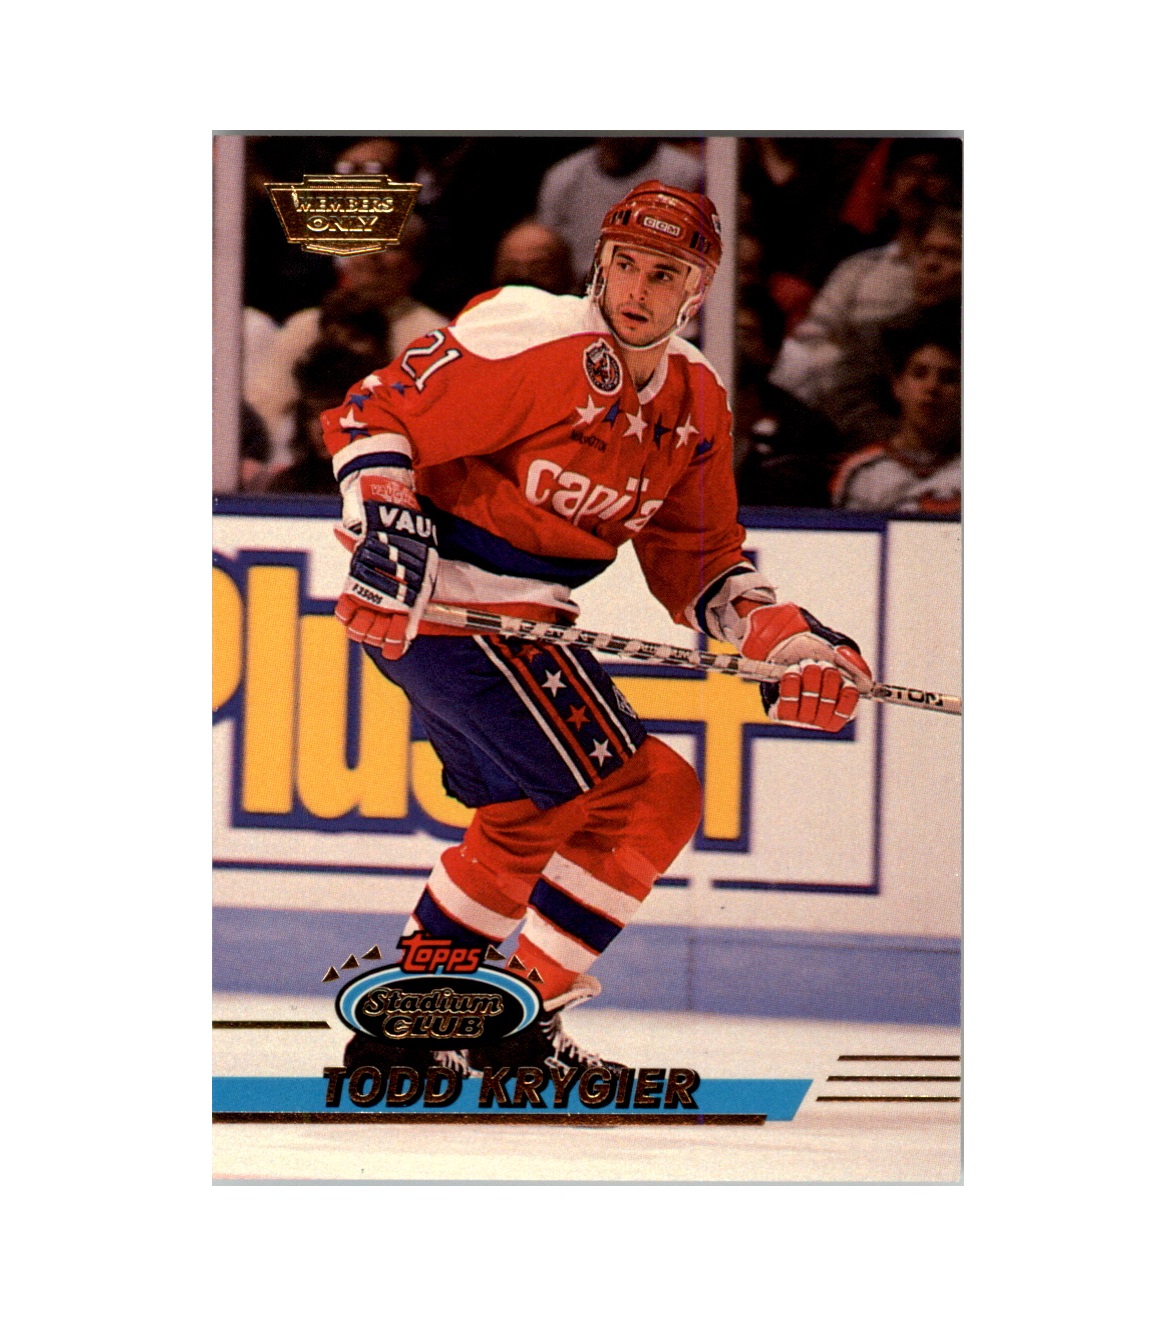 1993-94 Stadium Club Members Only Parallel #337 Todd Krygier (10-X31-CAPITALS)